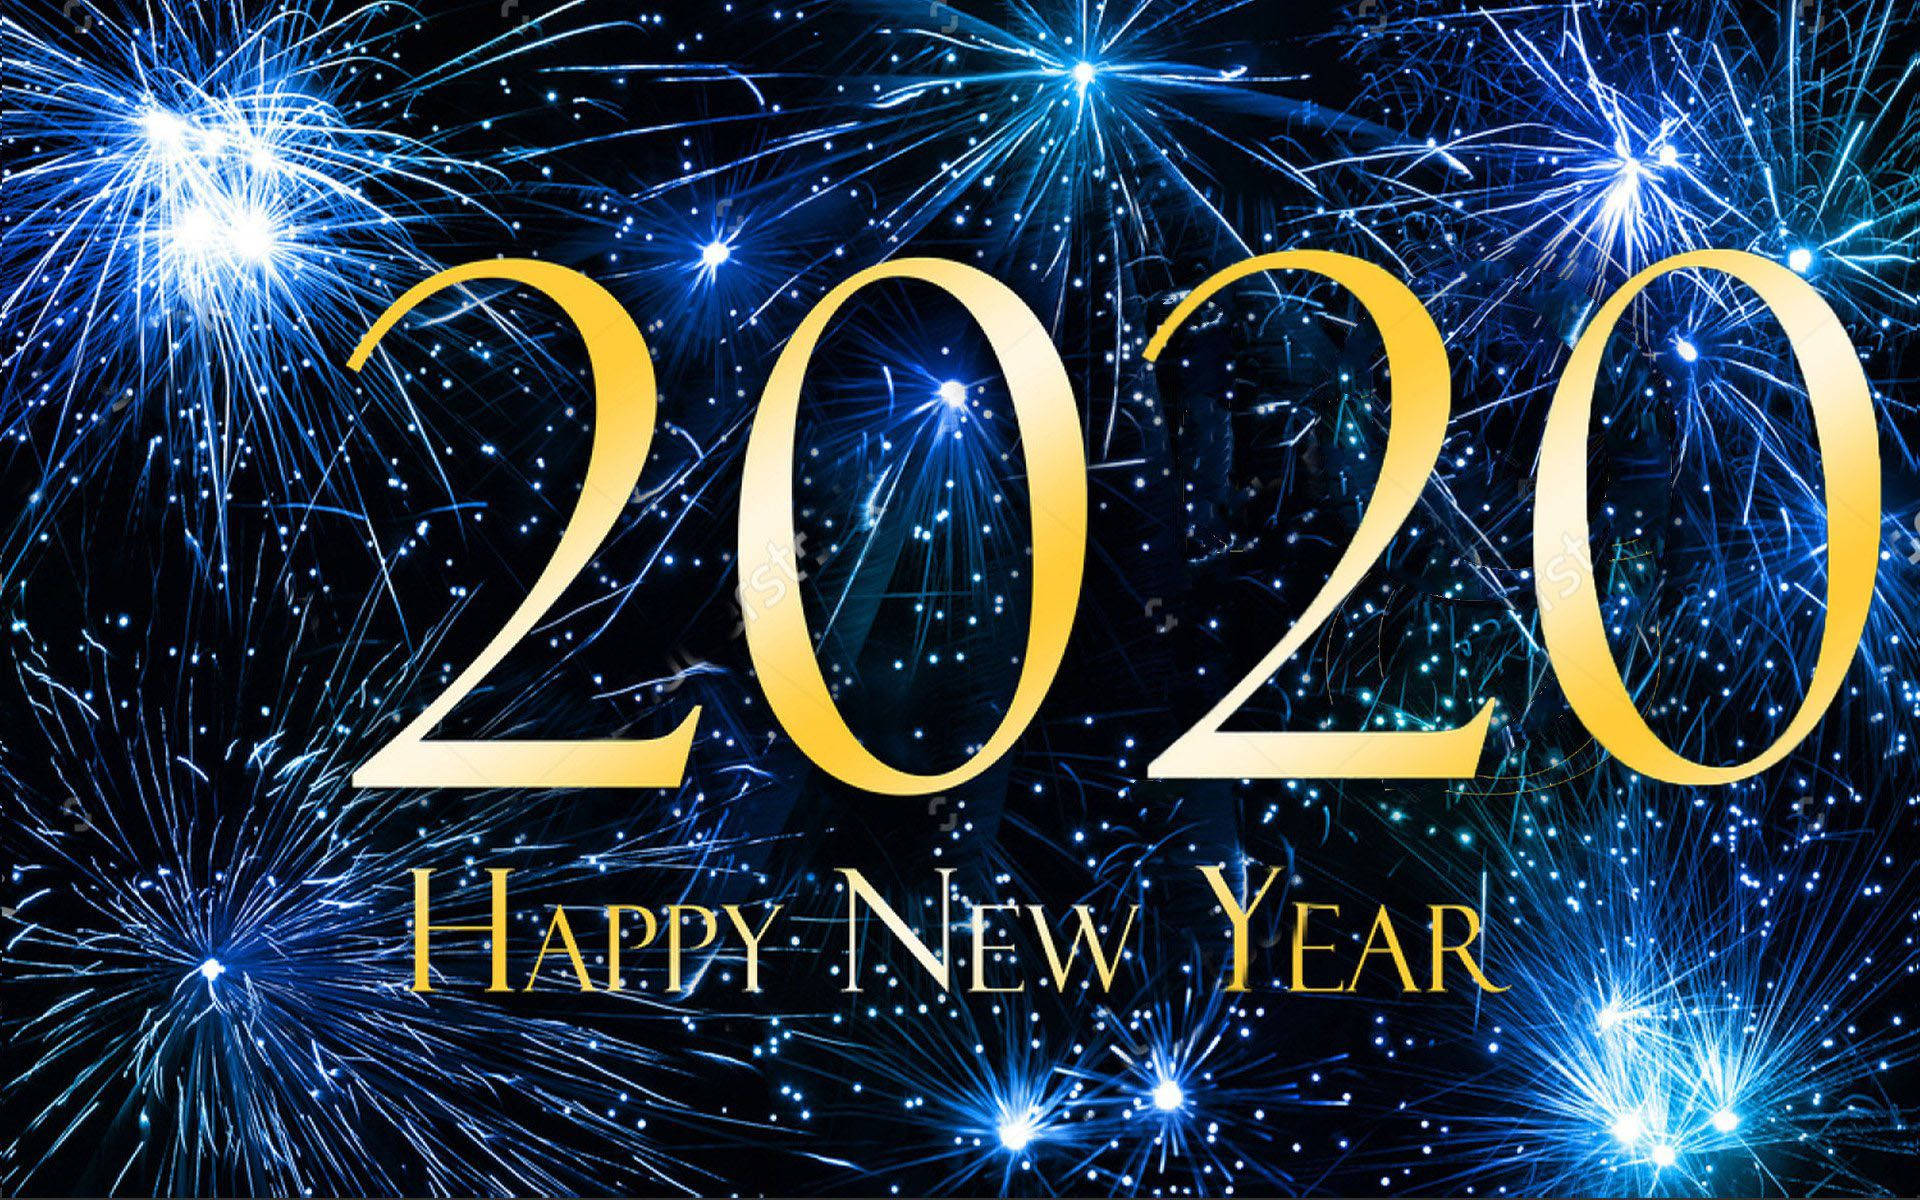 Happy New Year 2020 - A Blue and Gold night of possibilities! Wallpaper